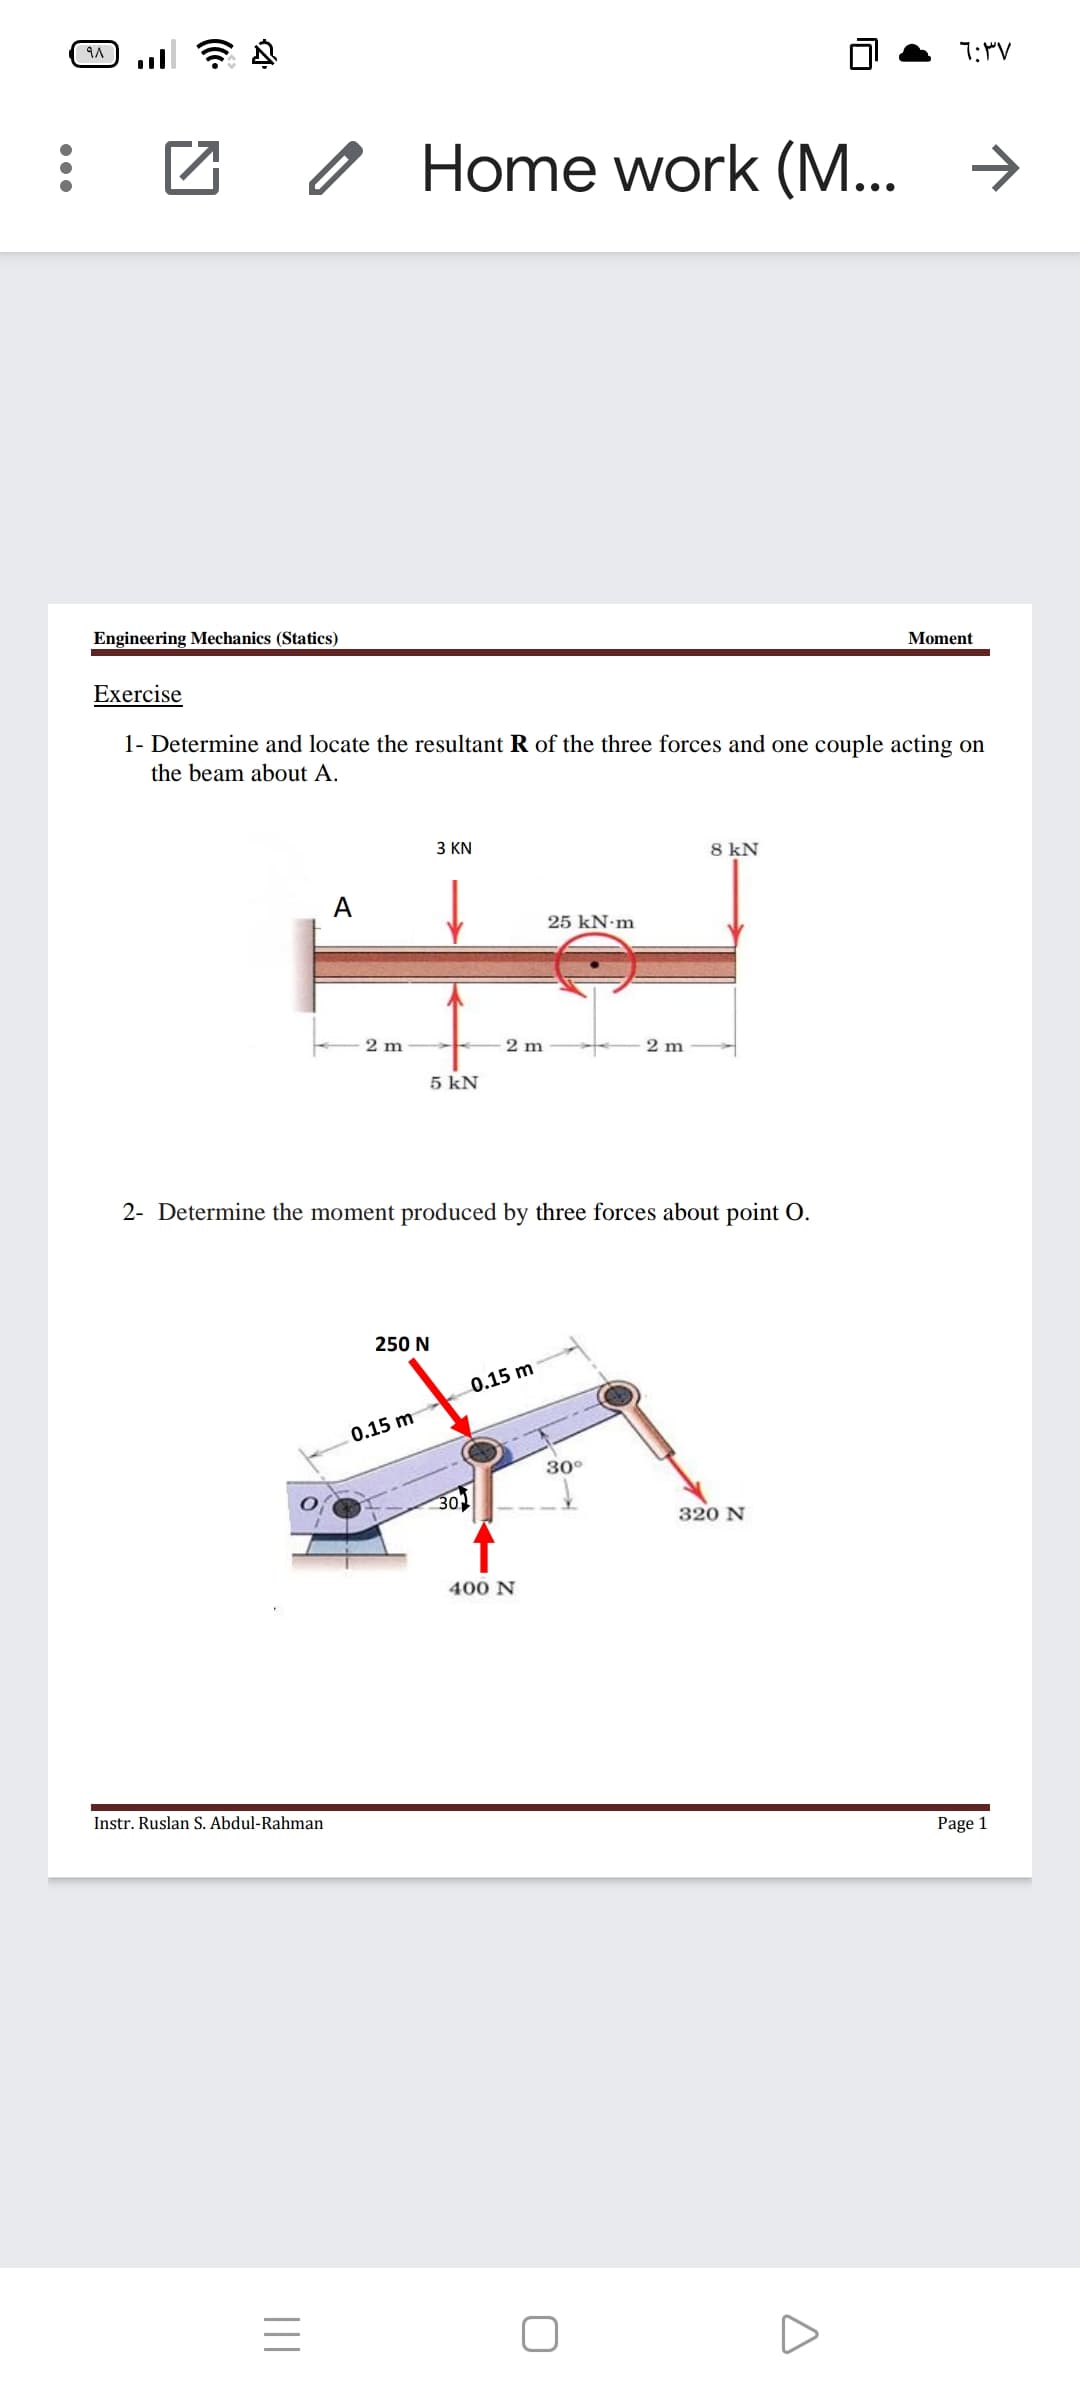 1:"V
O Home work (M... >
Engineering Mechanics (Statics)
Moment
Exercise
1- Determine and locate the resultant R of the three forces and one couple acting on
the beam about A.
3 KN
8 kN
A
25 kN-m
2 m
2 m
2 m
5 kN
2- Determine the moment produced by three forces about point O.
250 N
0.15 m
0.15 m
30°
30
320 N
400 N
Instr. Ruslan S. Abdul-Rahman
Page 1
